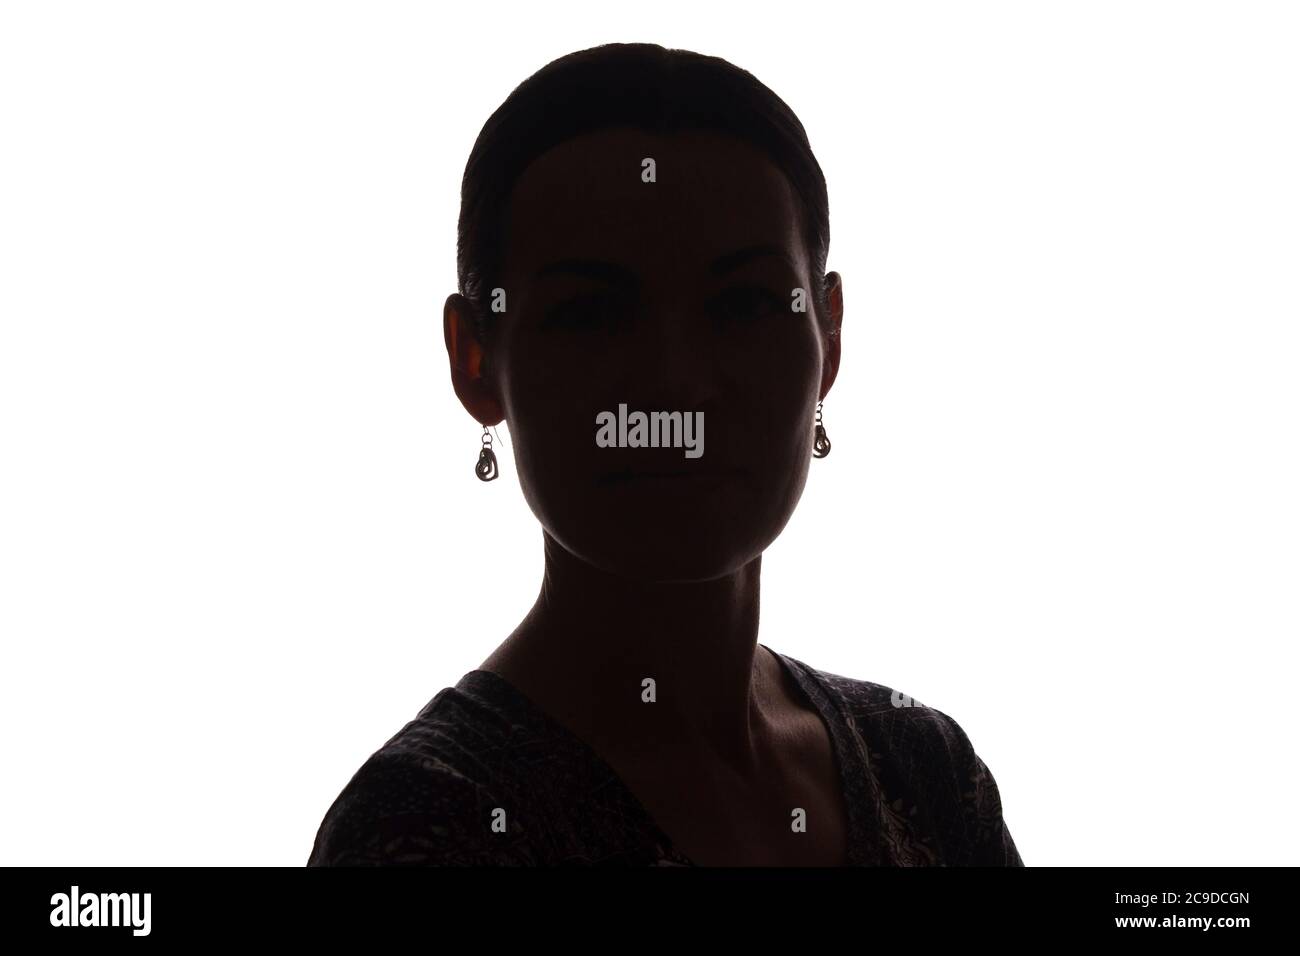 Young woman look ahead with lock of hair - isolated silhouette of a front view Stock Photo